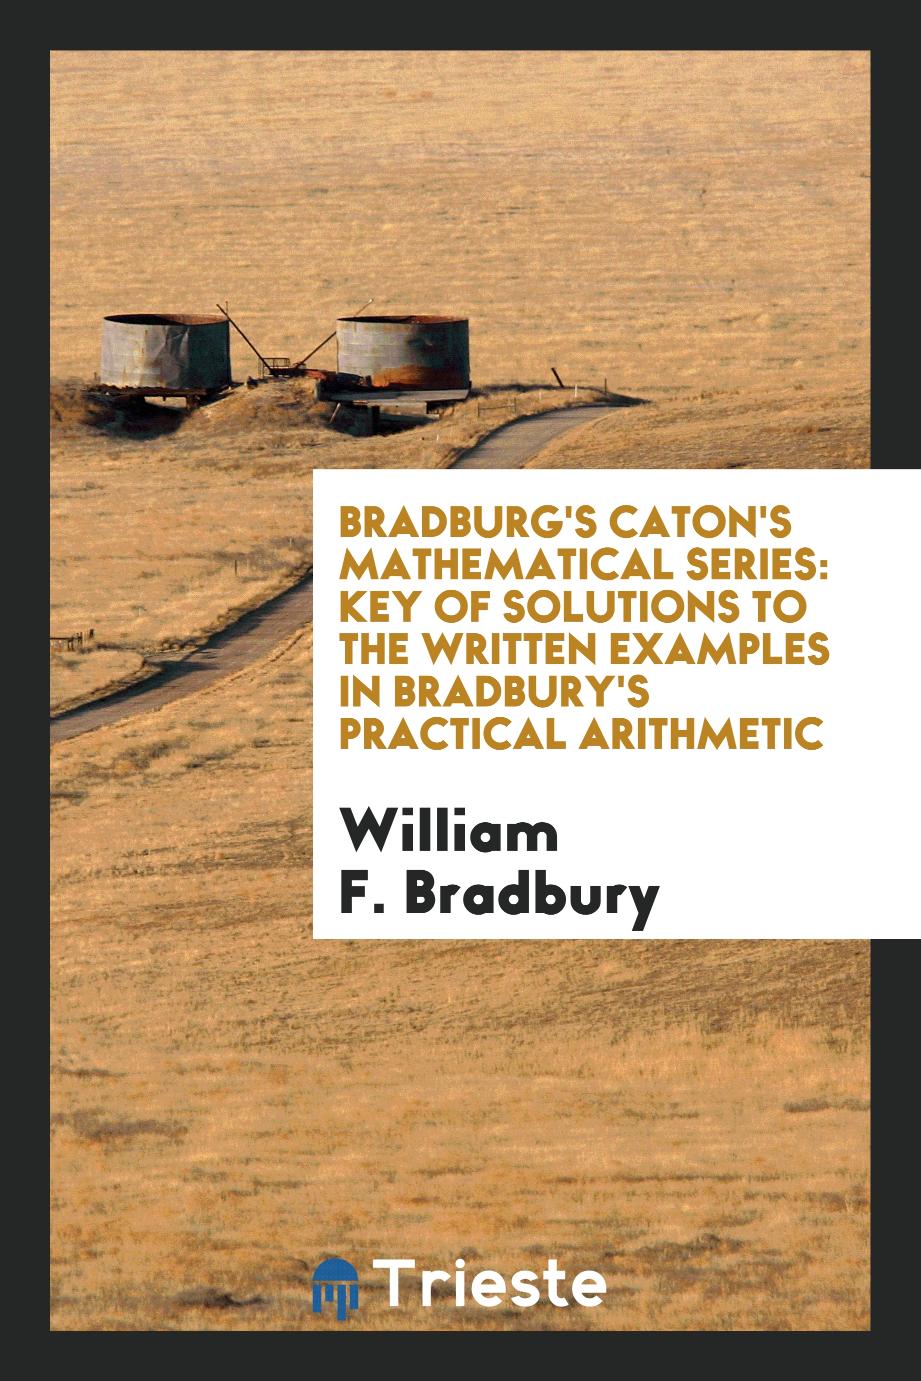 Bradburg's Caton's Mathematical Series: Key of Solutions to the Written Examples in Bradbury's Practical Arithmetic